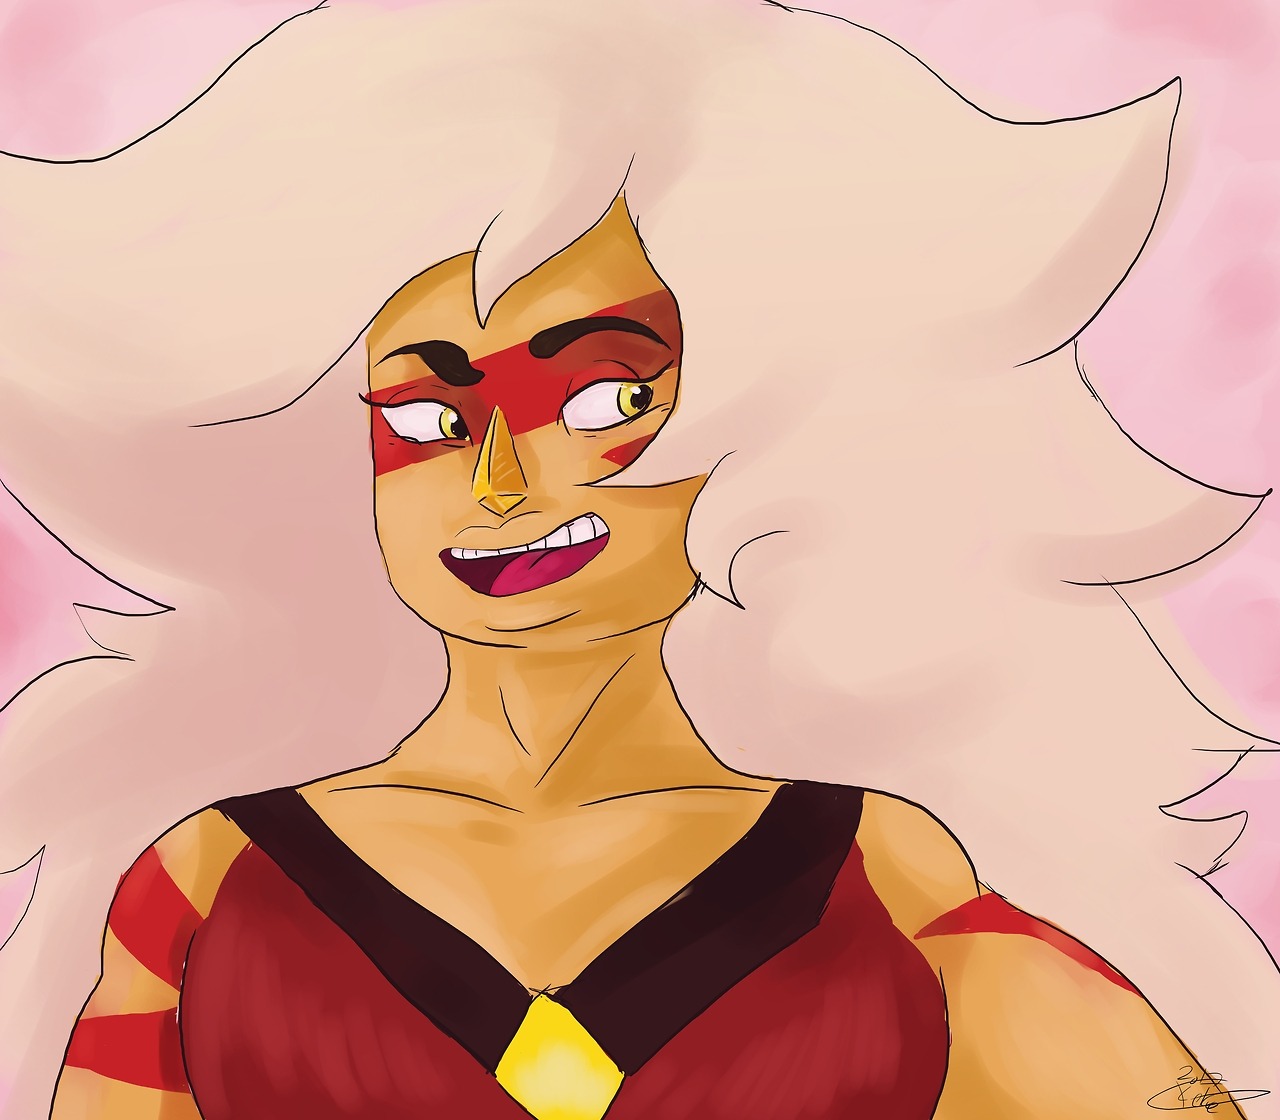 more Jasper haha I’m just so exited I got a tablet today and well so uh Jasper is fun to draw so yeah gonna spam stuff here untill I get bored of playing with this thing